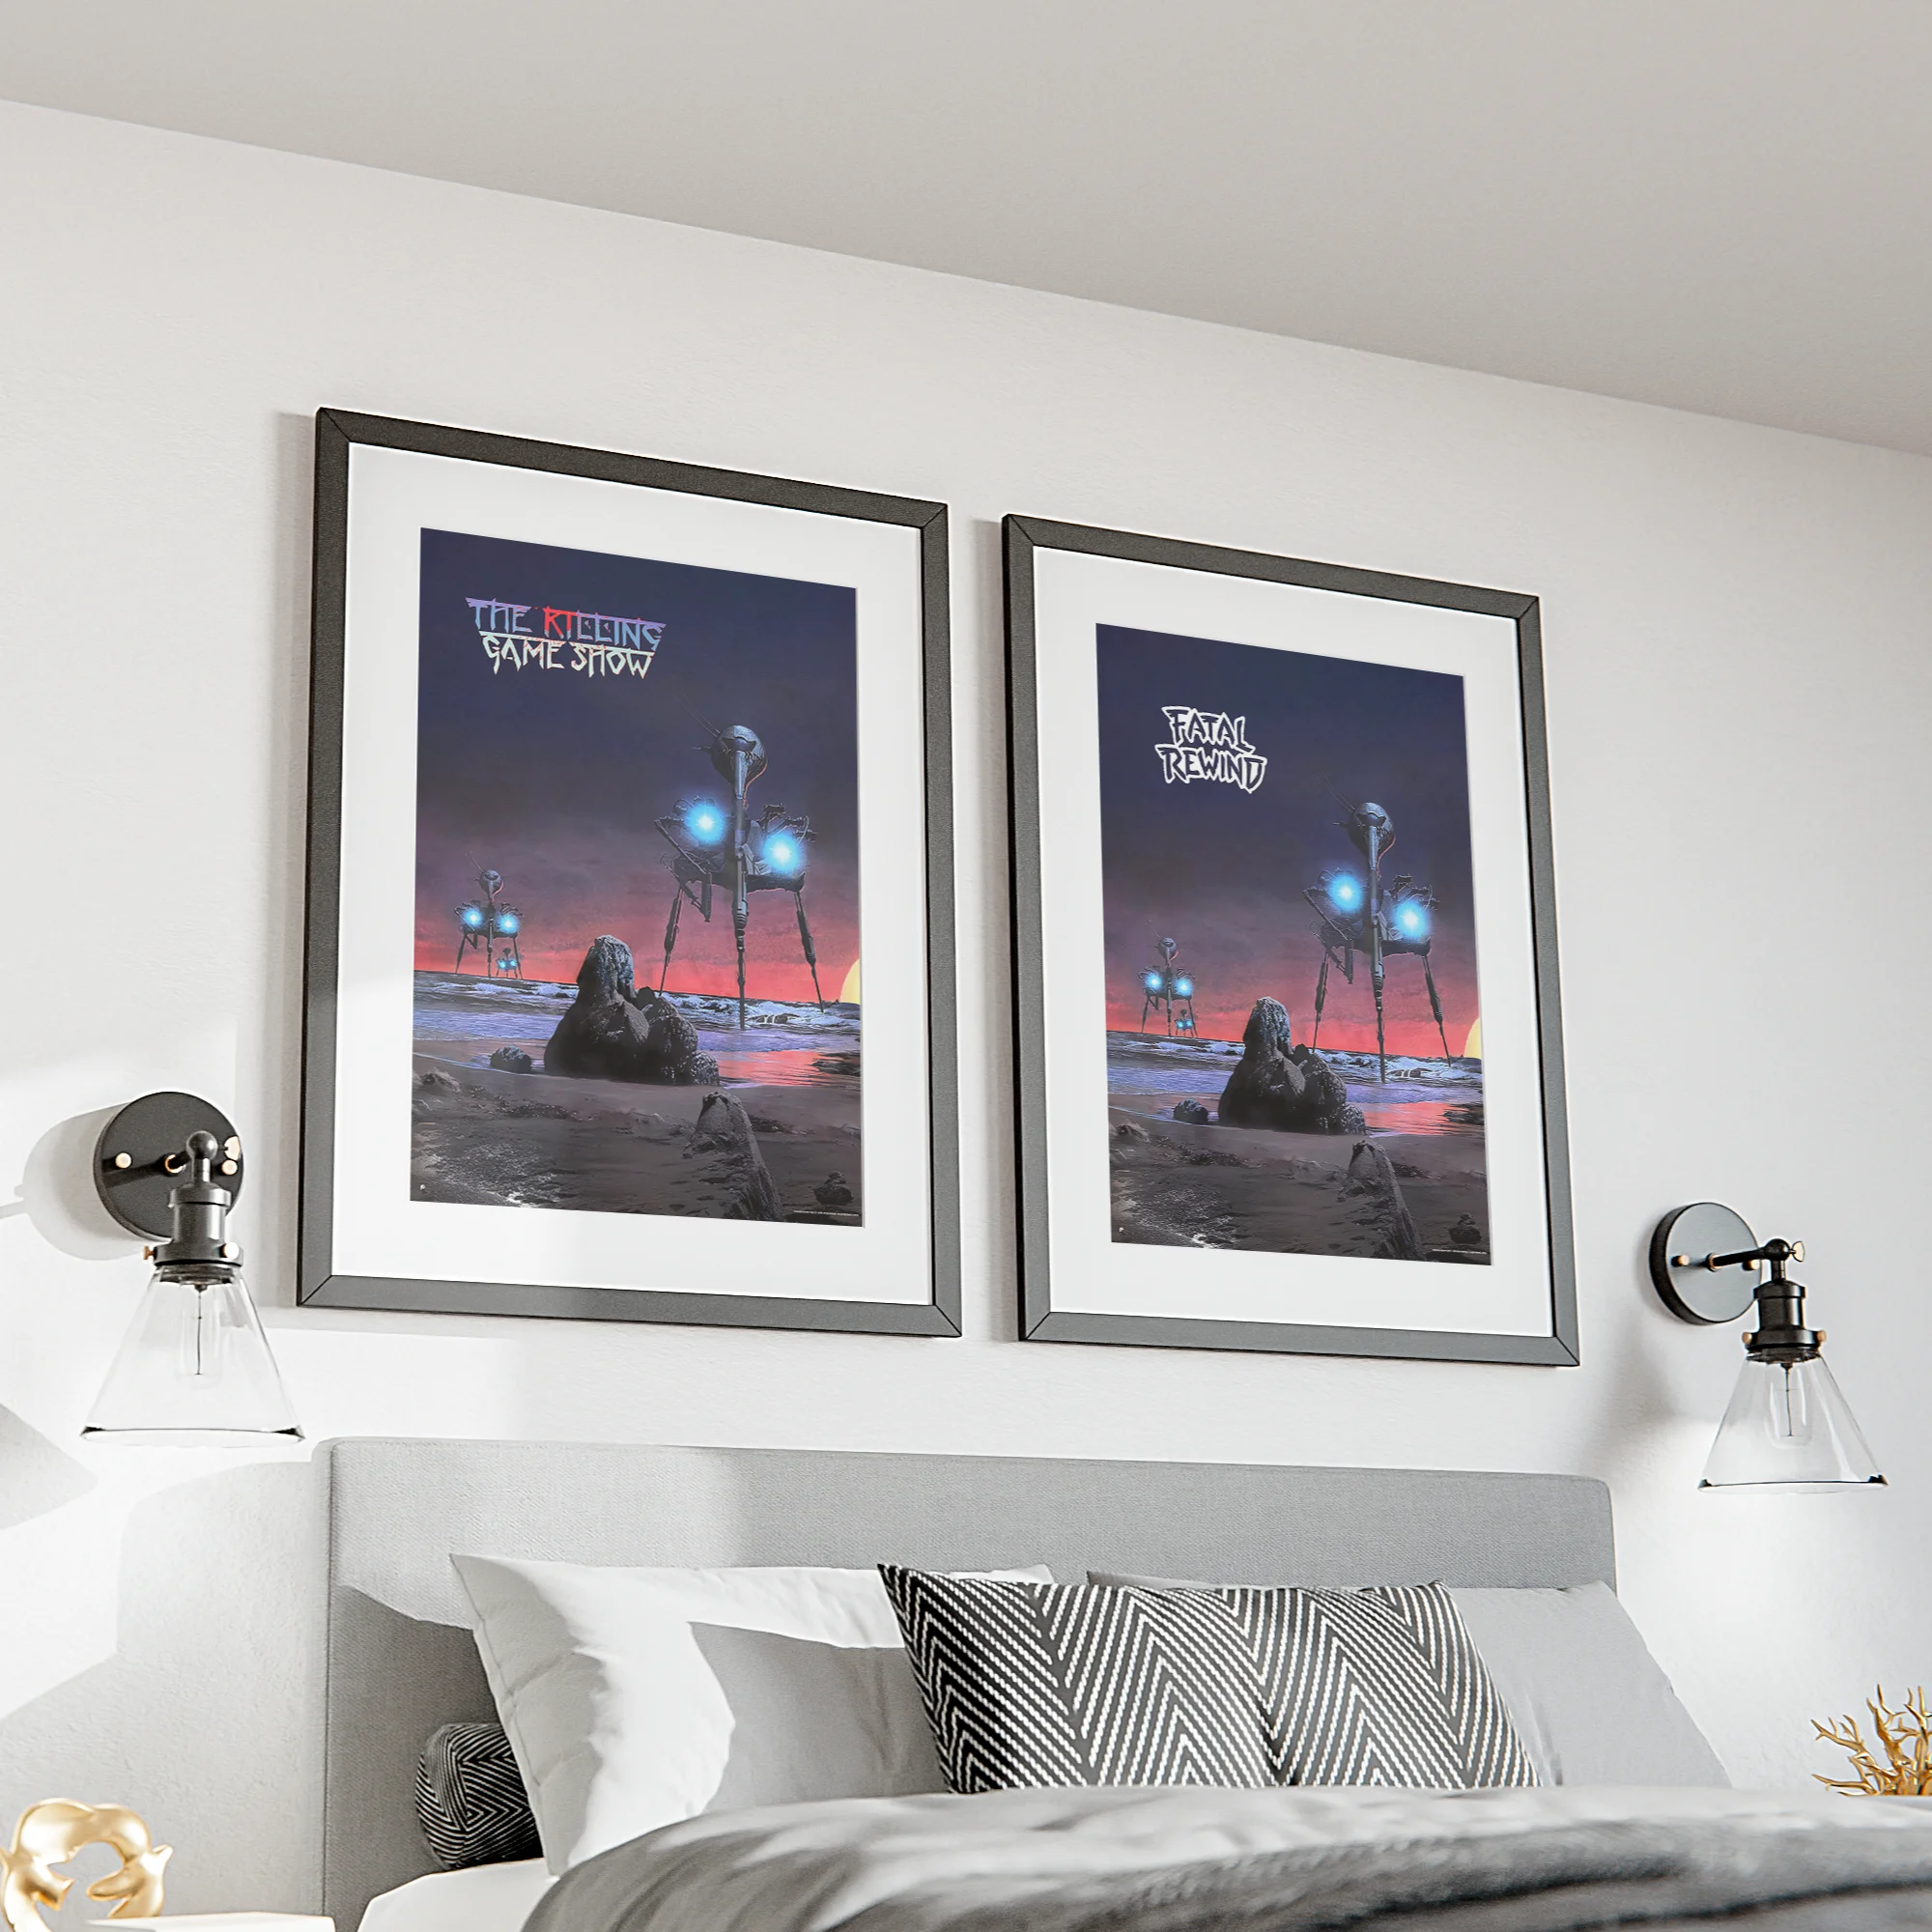 Framed sci-fi posters above bed in modern bedroom.